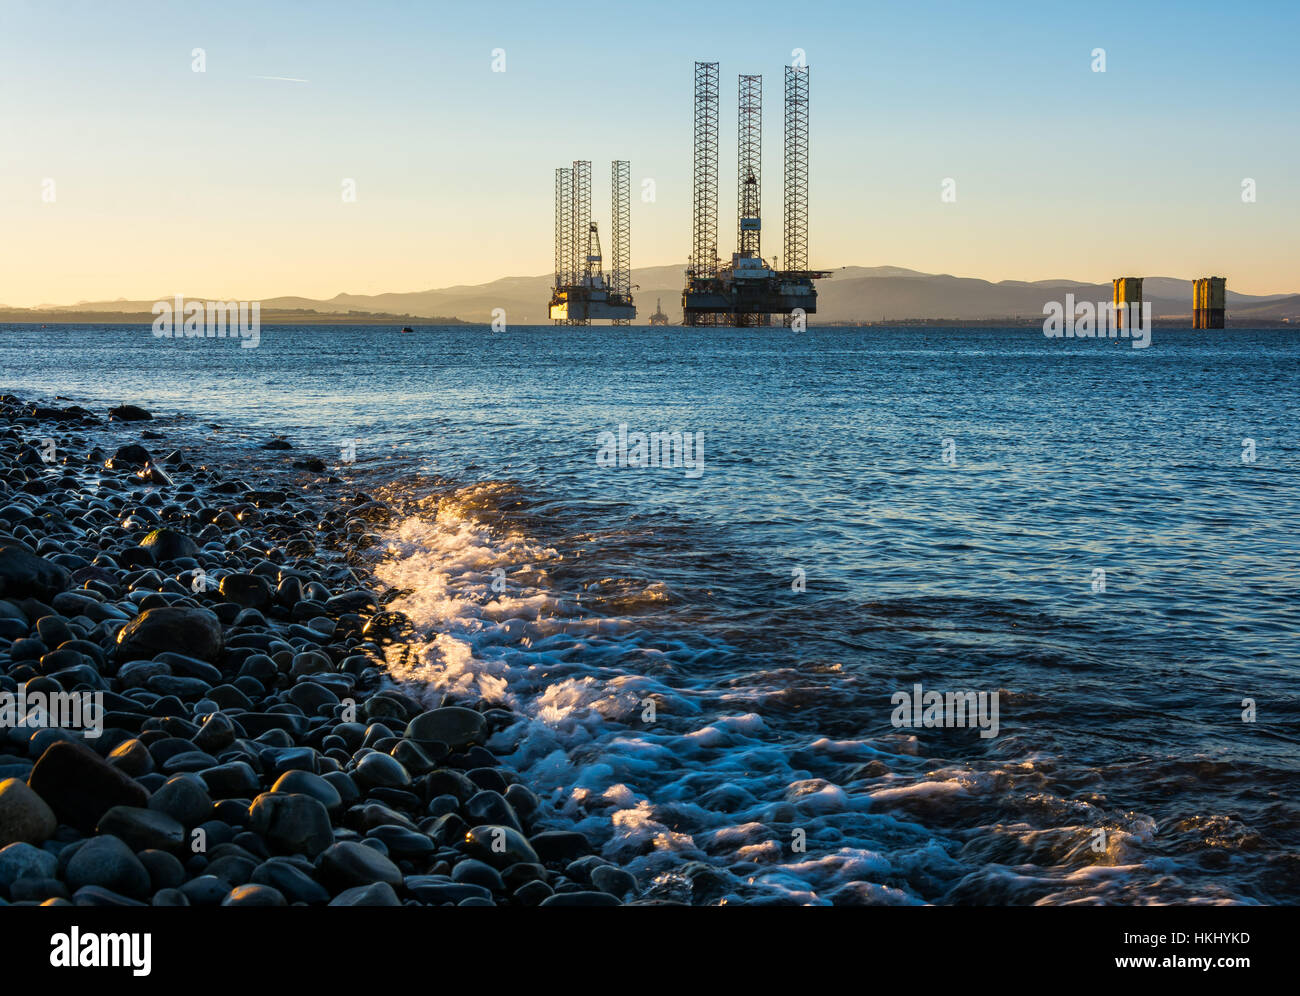 Oil Rigs in the Cromarty Firth, Ross Shire, Scotland, United Kingdom Stock Photo